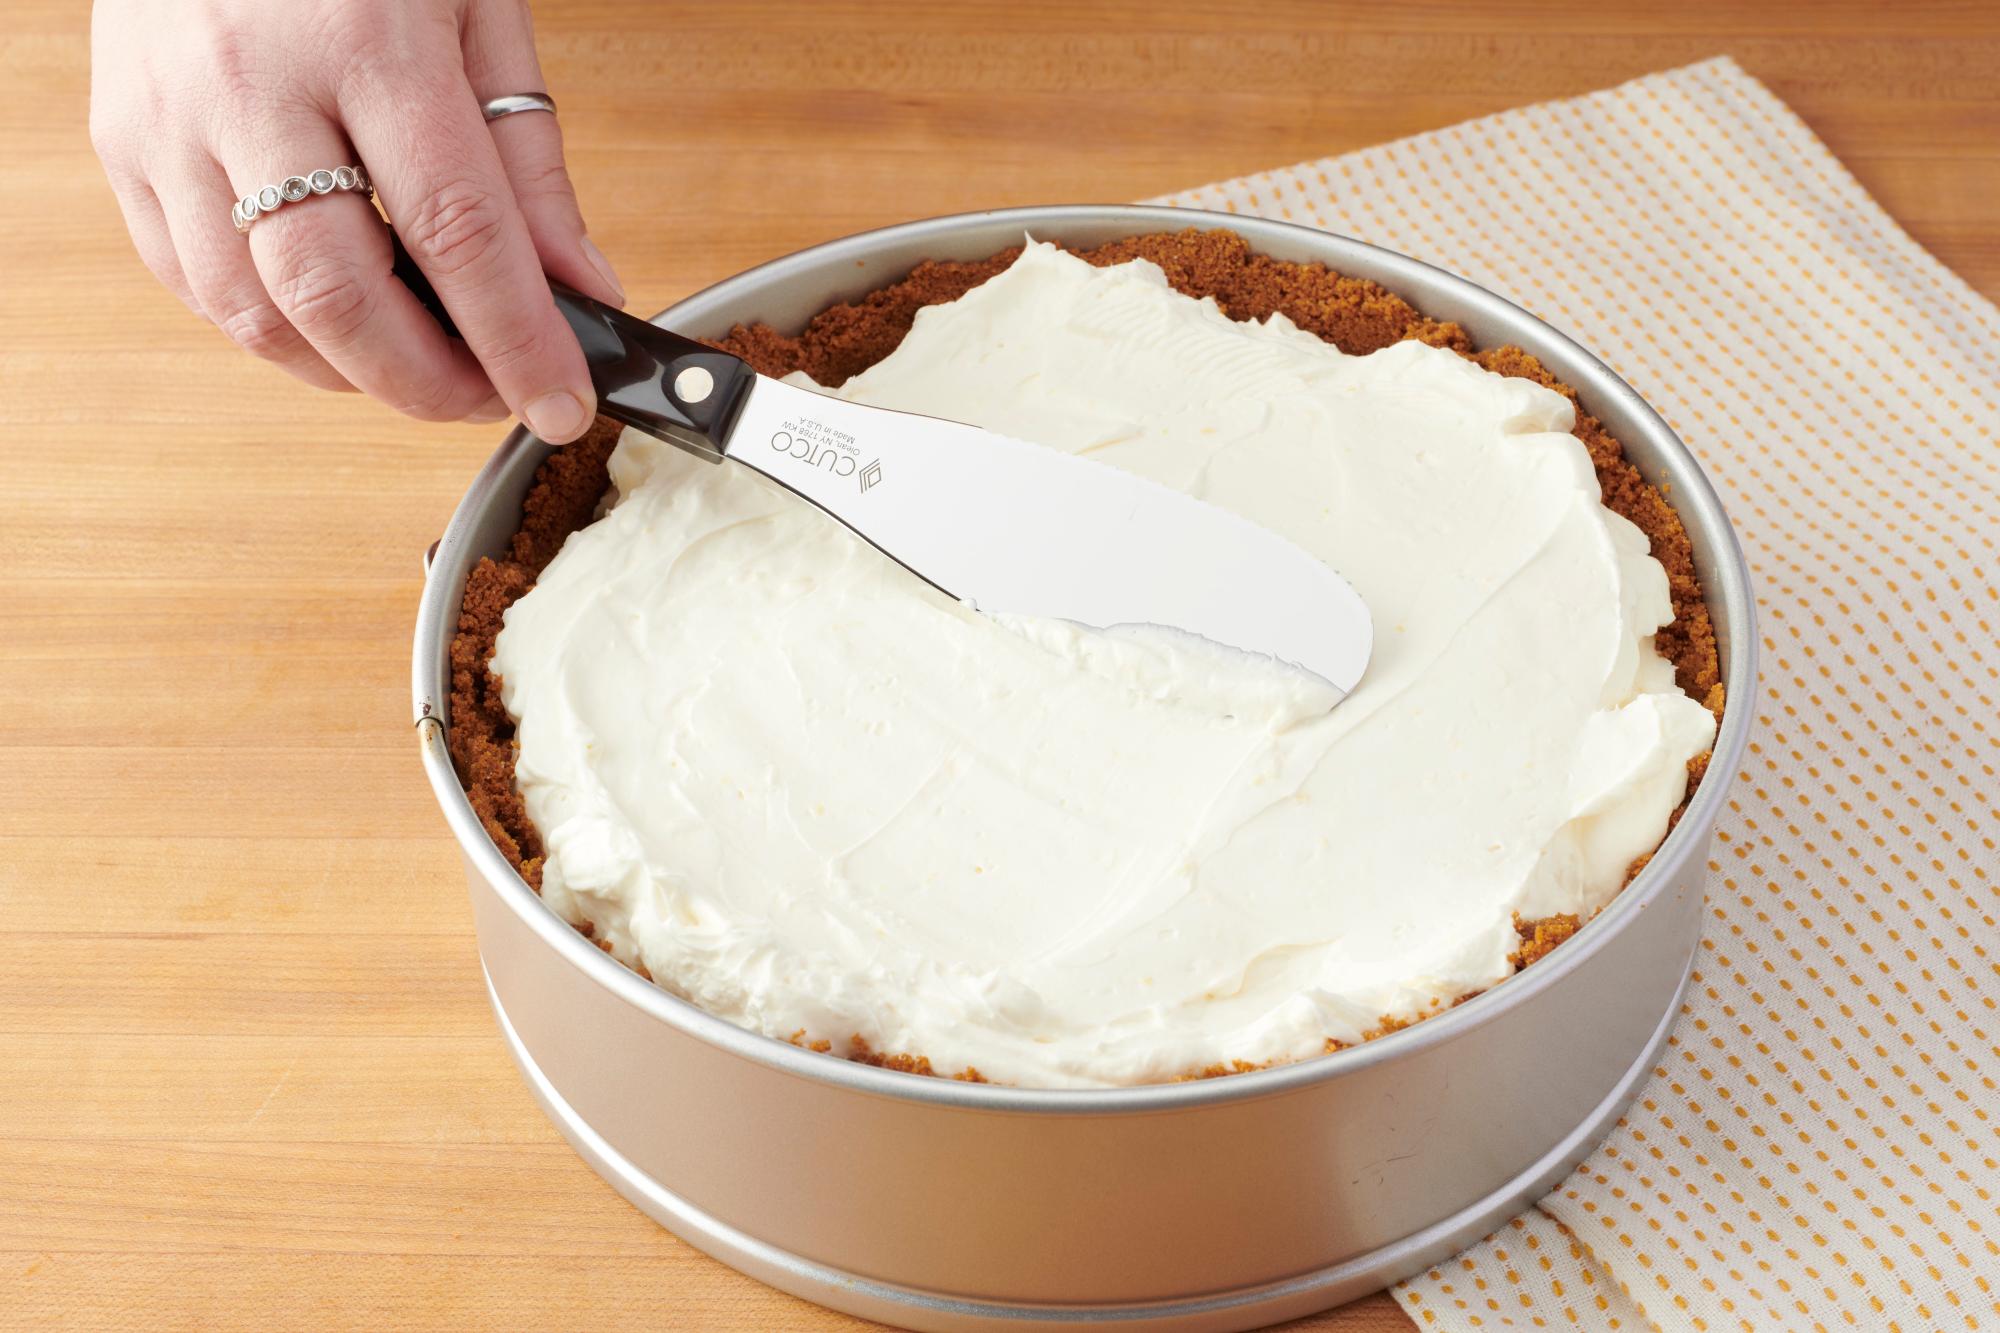 Using a Spatula Spreader to spread the filling.